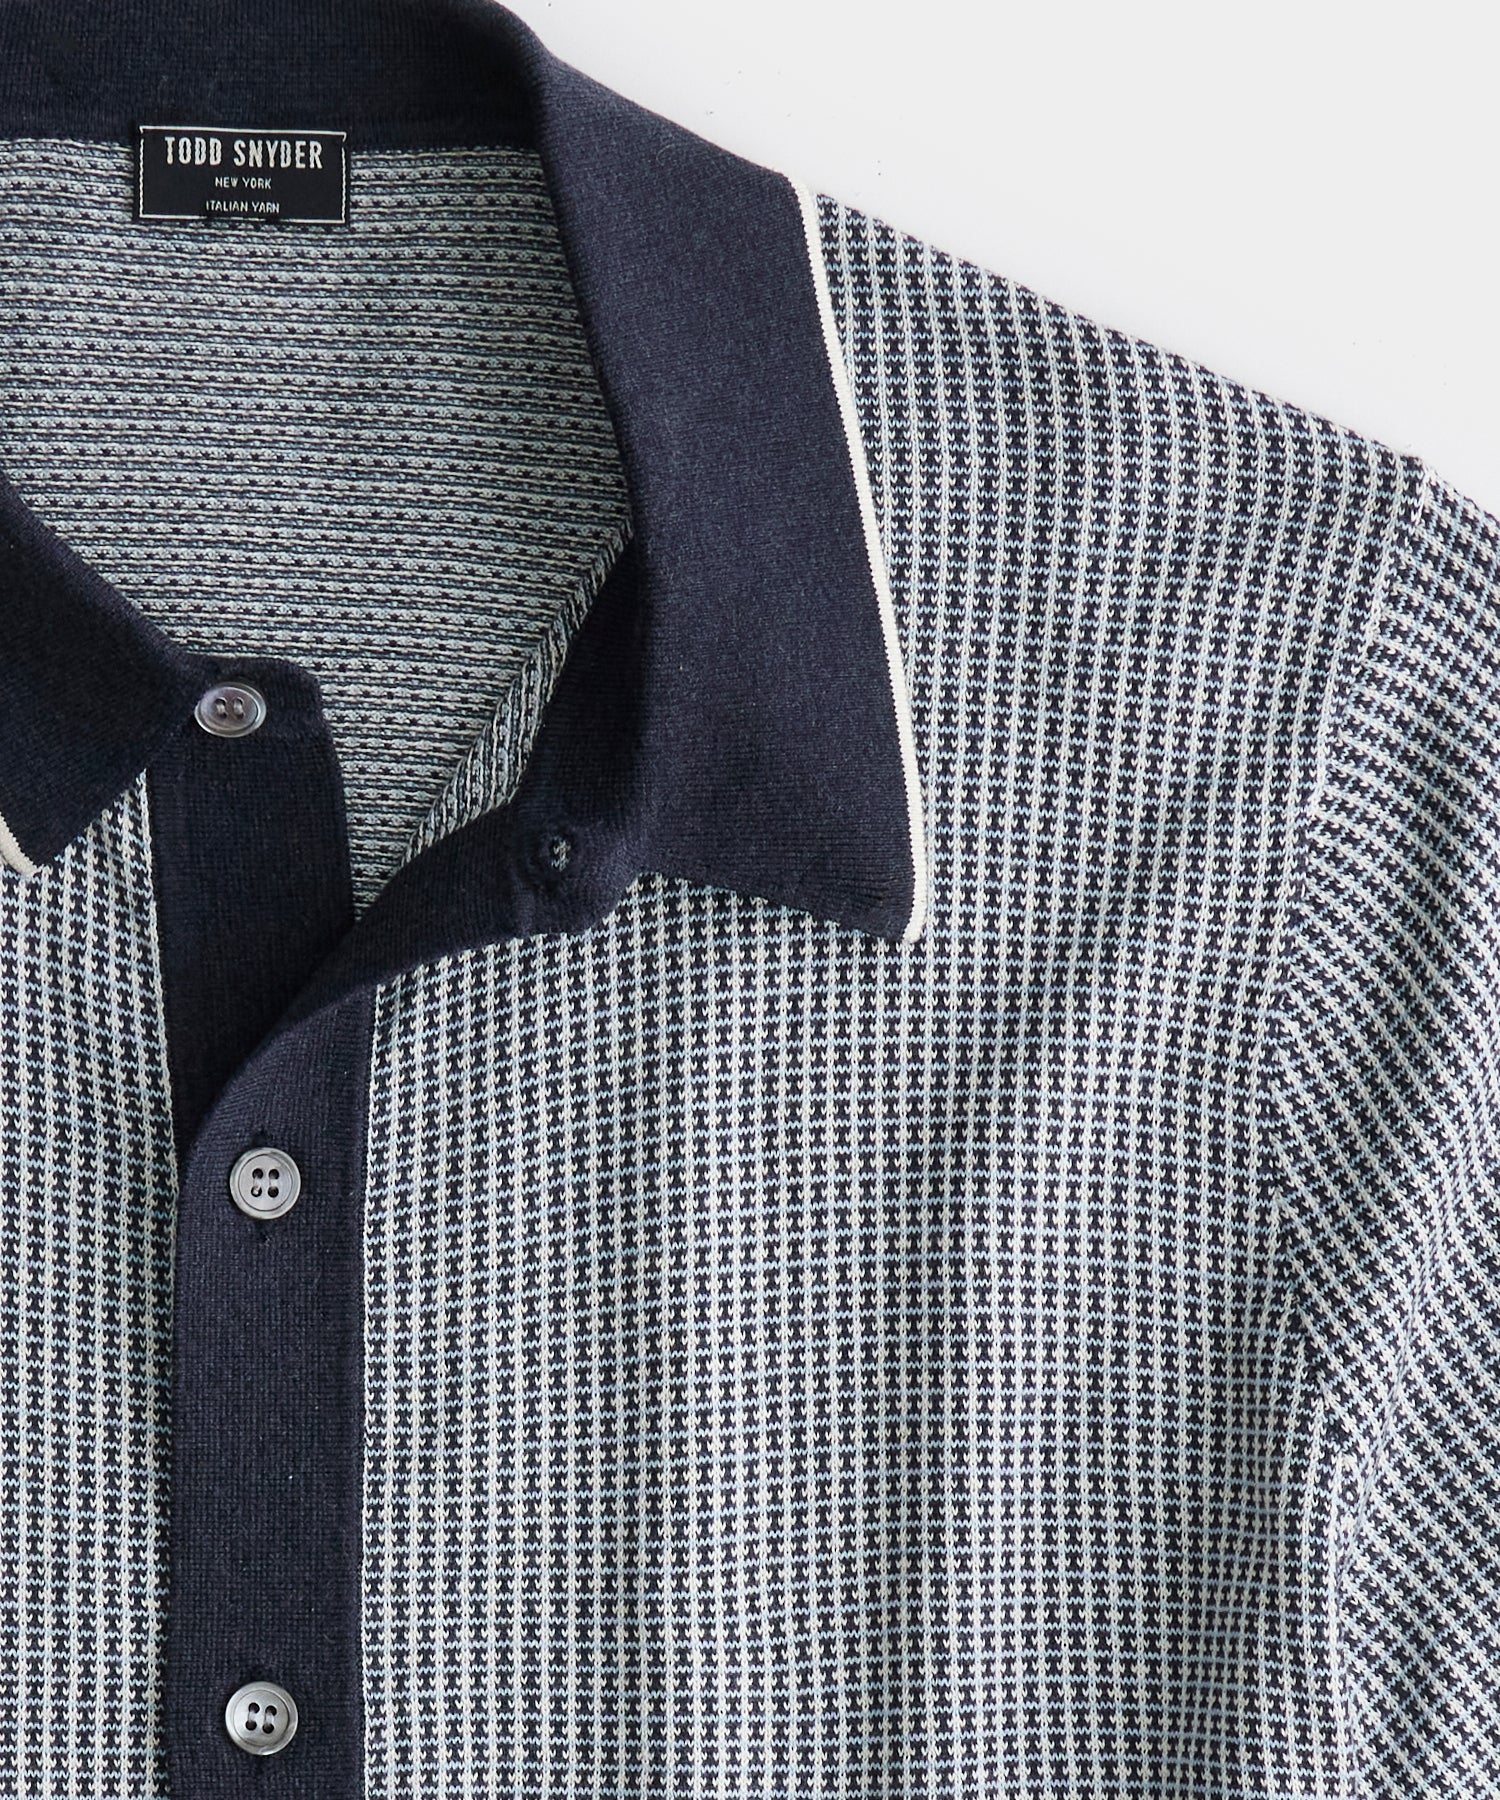 Black polo shirt made of wool, silk and cashmere in a geometric pattern